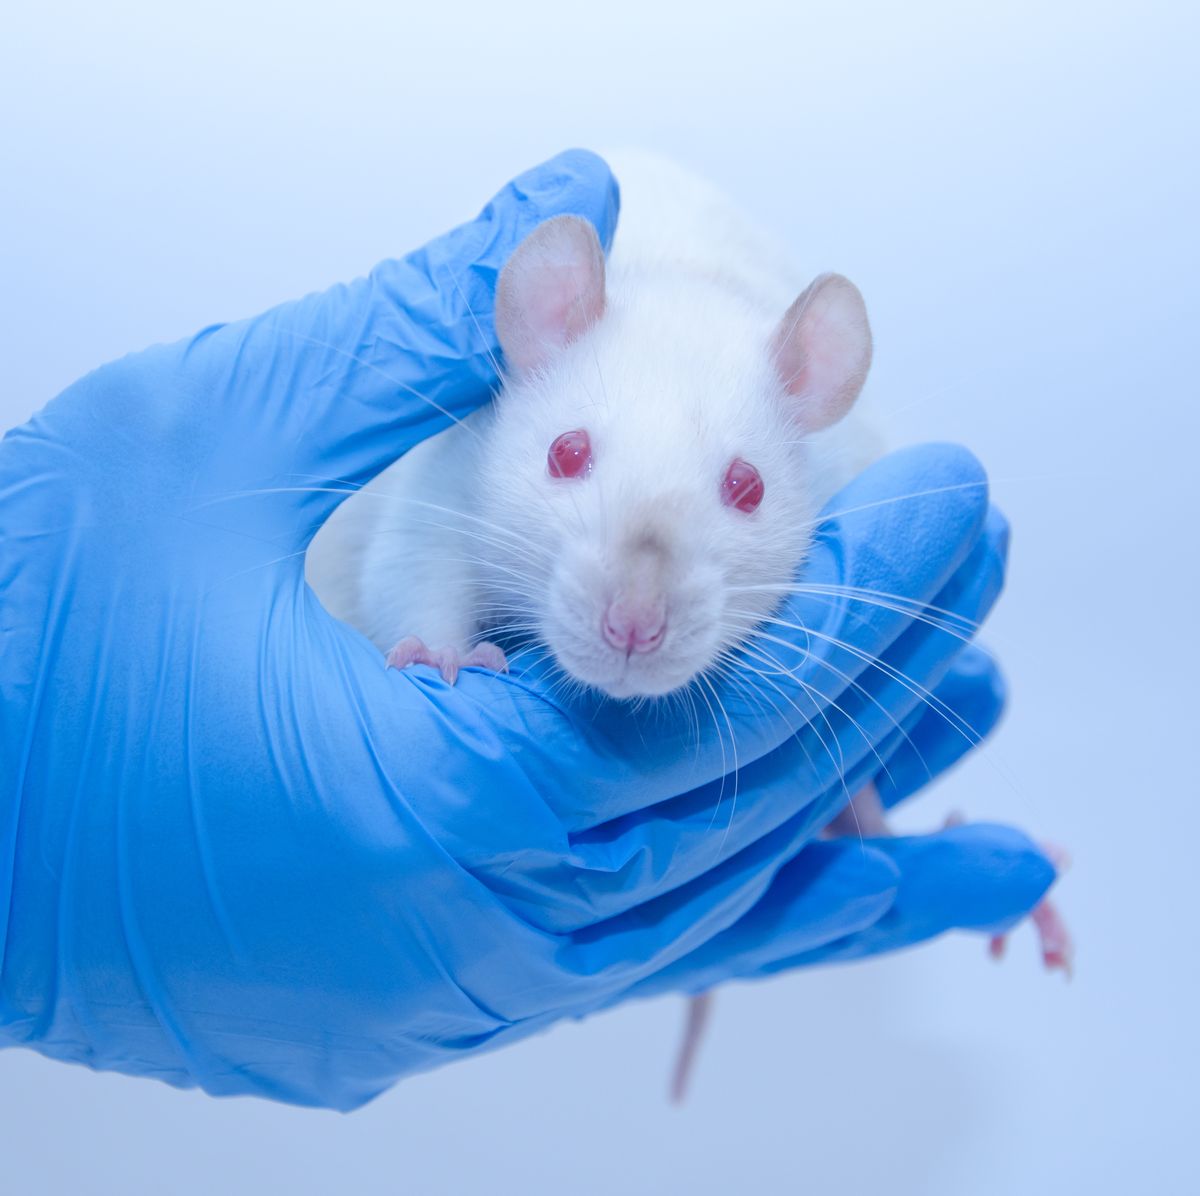 Editing one gene extends mouse life expectancy by 23%